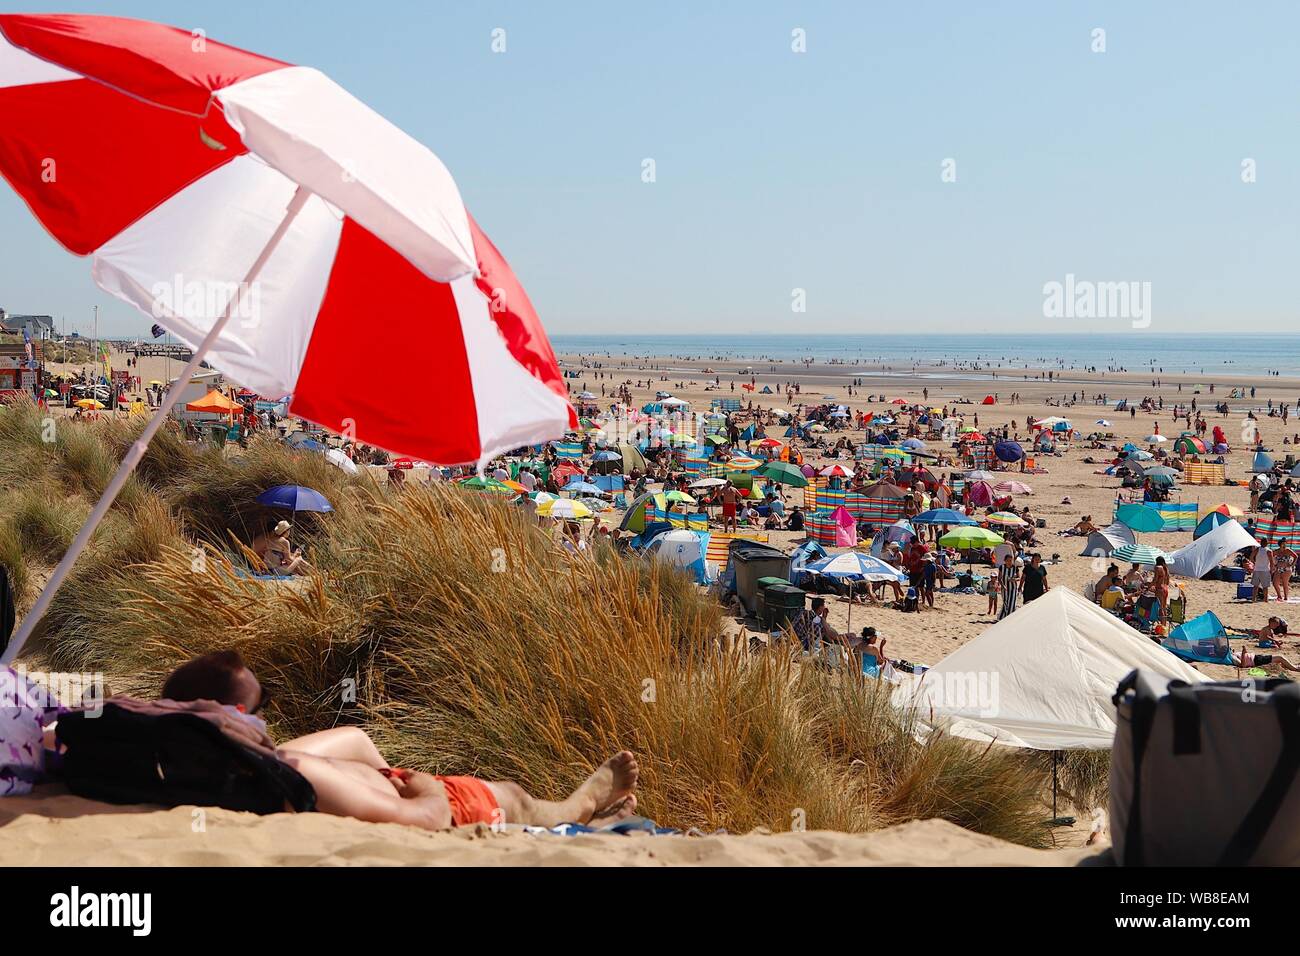 Camber, East Sussex, UK. 25 Aug, 2019. UK Weather: The hot sunshine beats down on these sunbathers on a very busy Bank Holiday Weekend at the Camber Sands beach in East Sussex. ©Paul Lawrenson 2019, Photo Credit: Paul Lawrenson/Alamy Live News Stock Photo